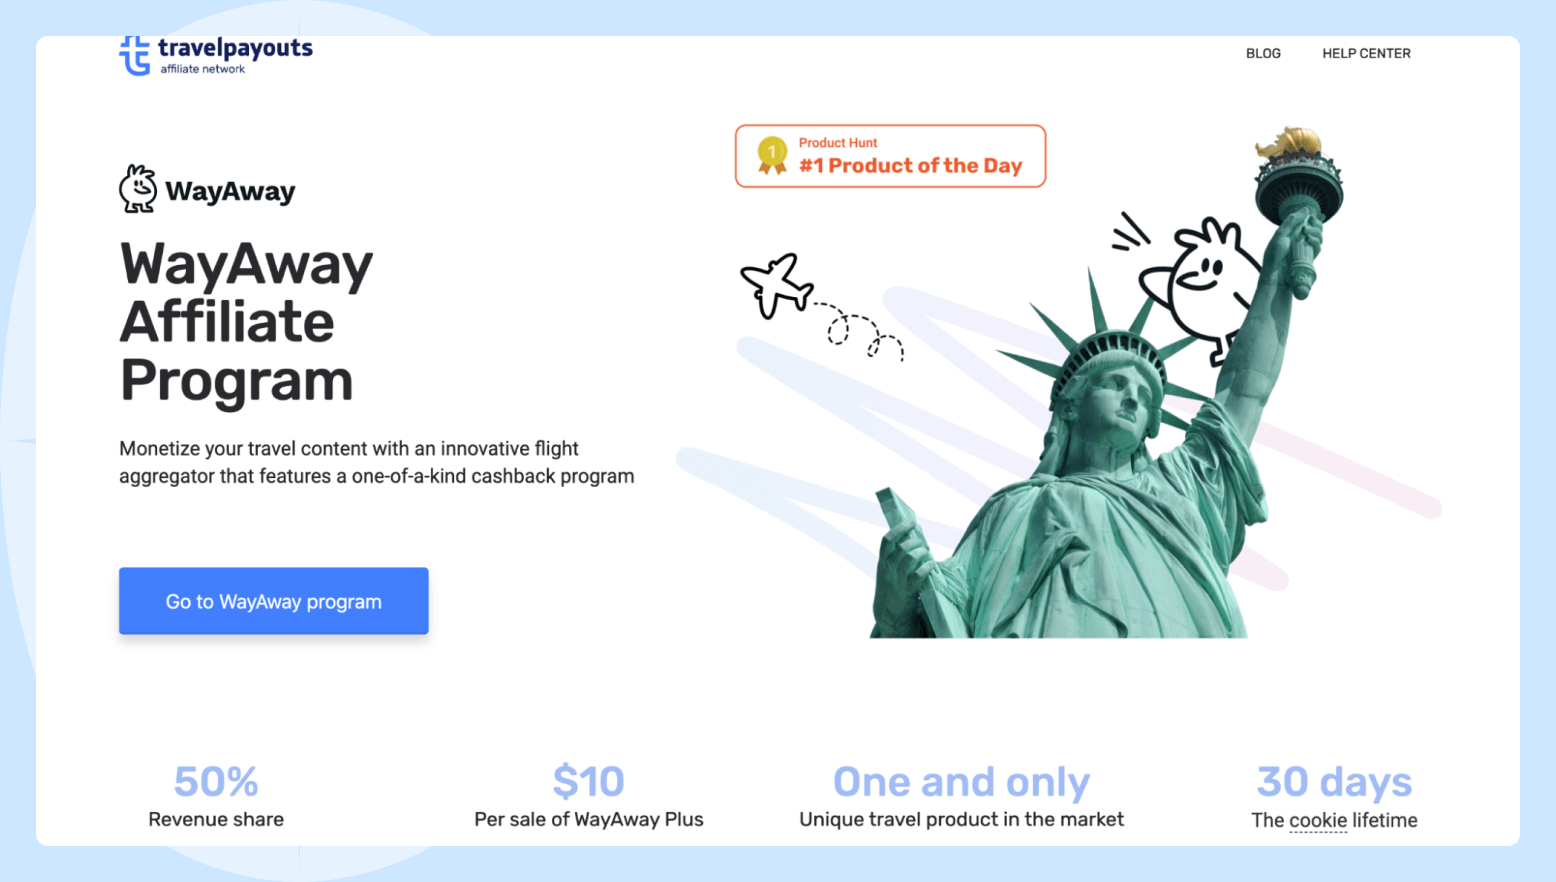 Screenshot of the WayAway affiliate program page featuring the Statue of Liberty and a plane flying in the background.